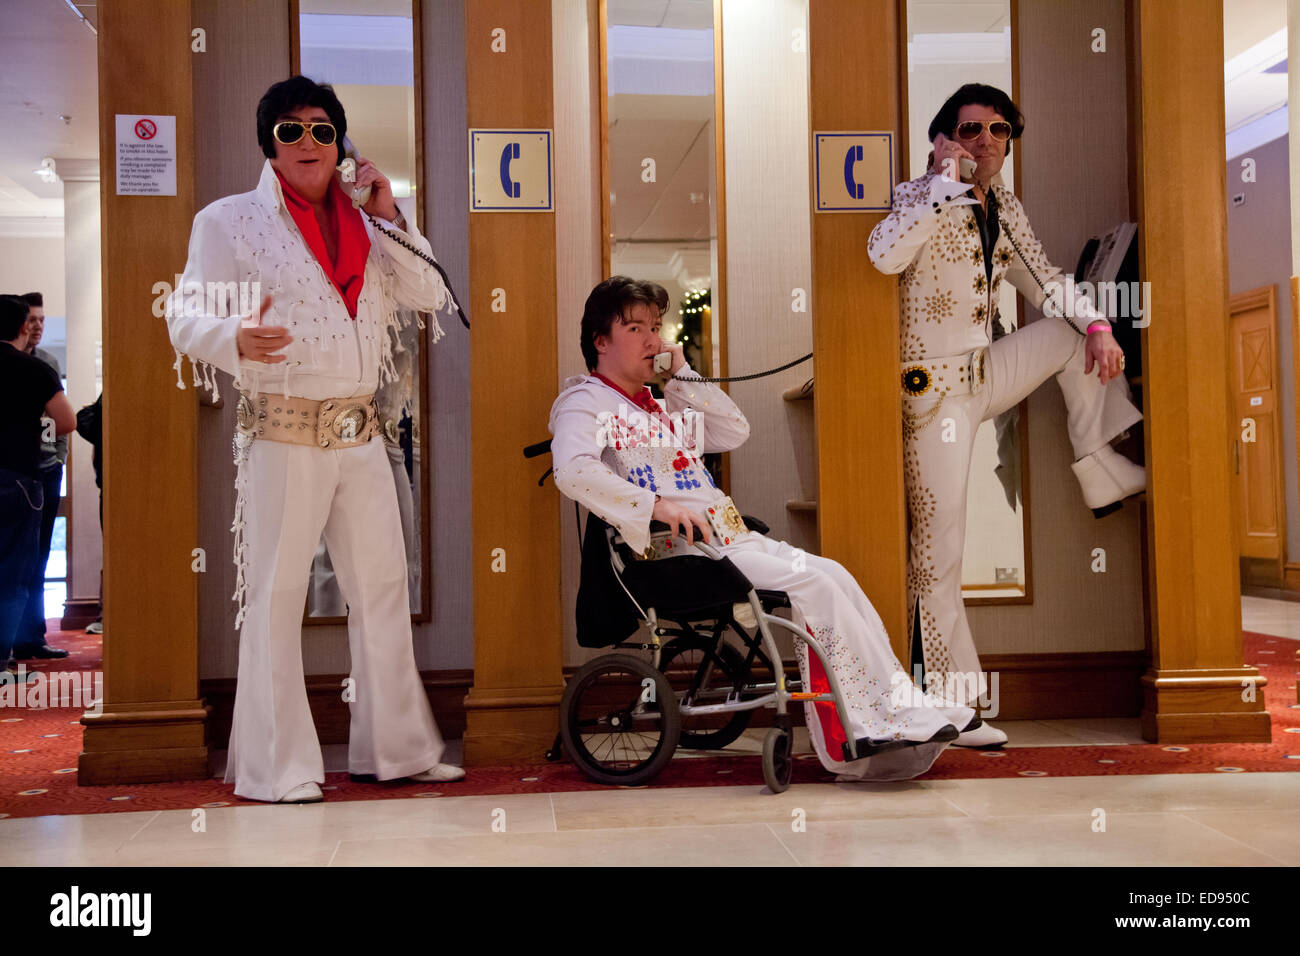 Elvis Presley tribute or impersonation act.  2015 Stock Photo